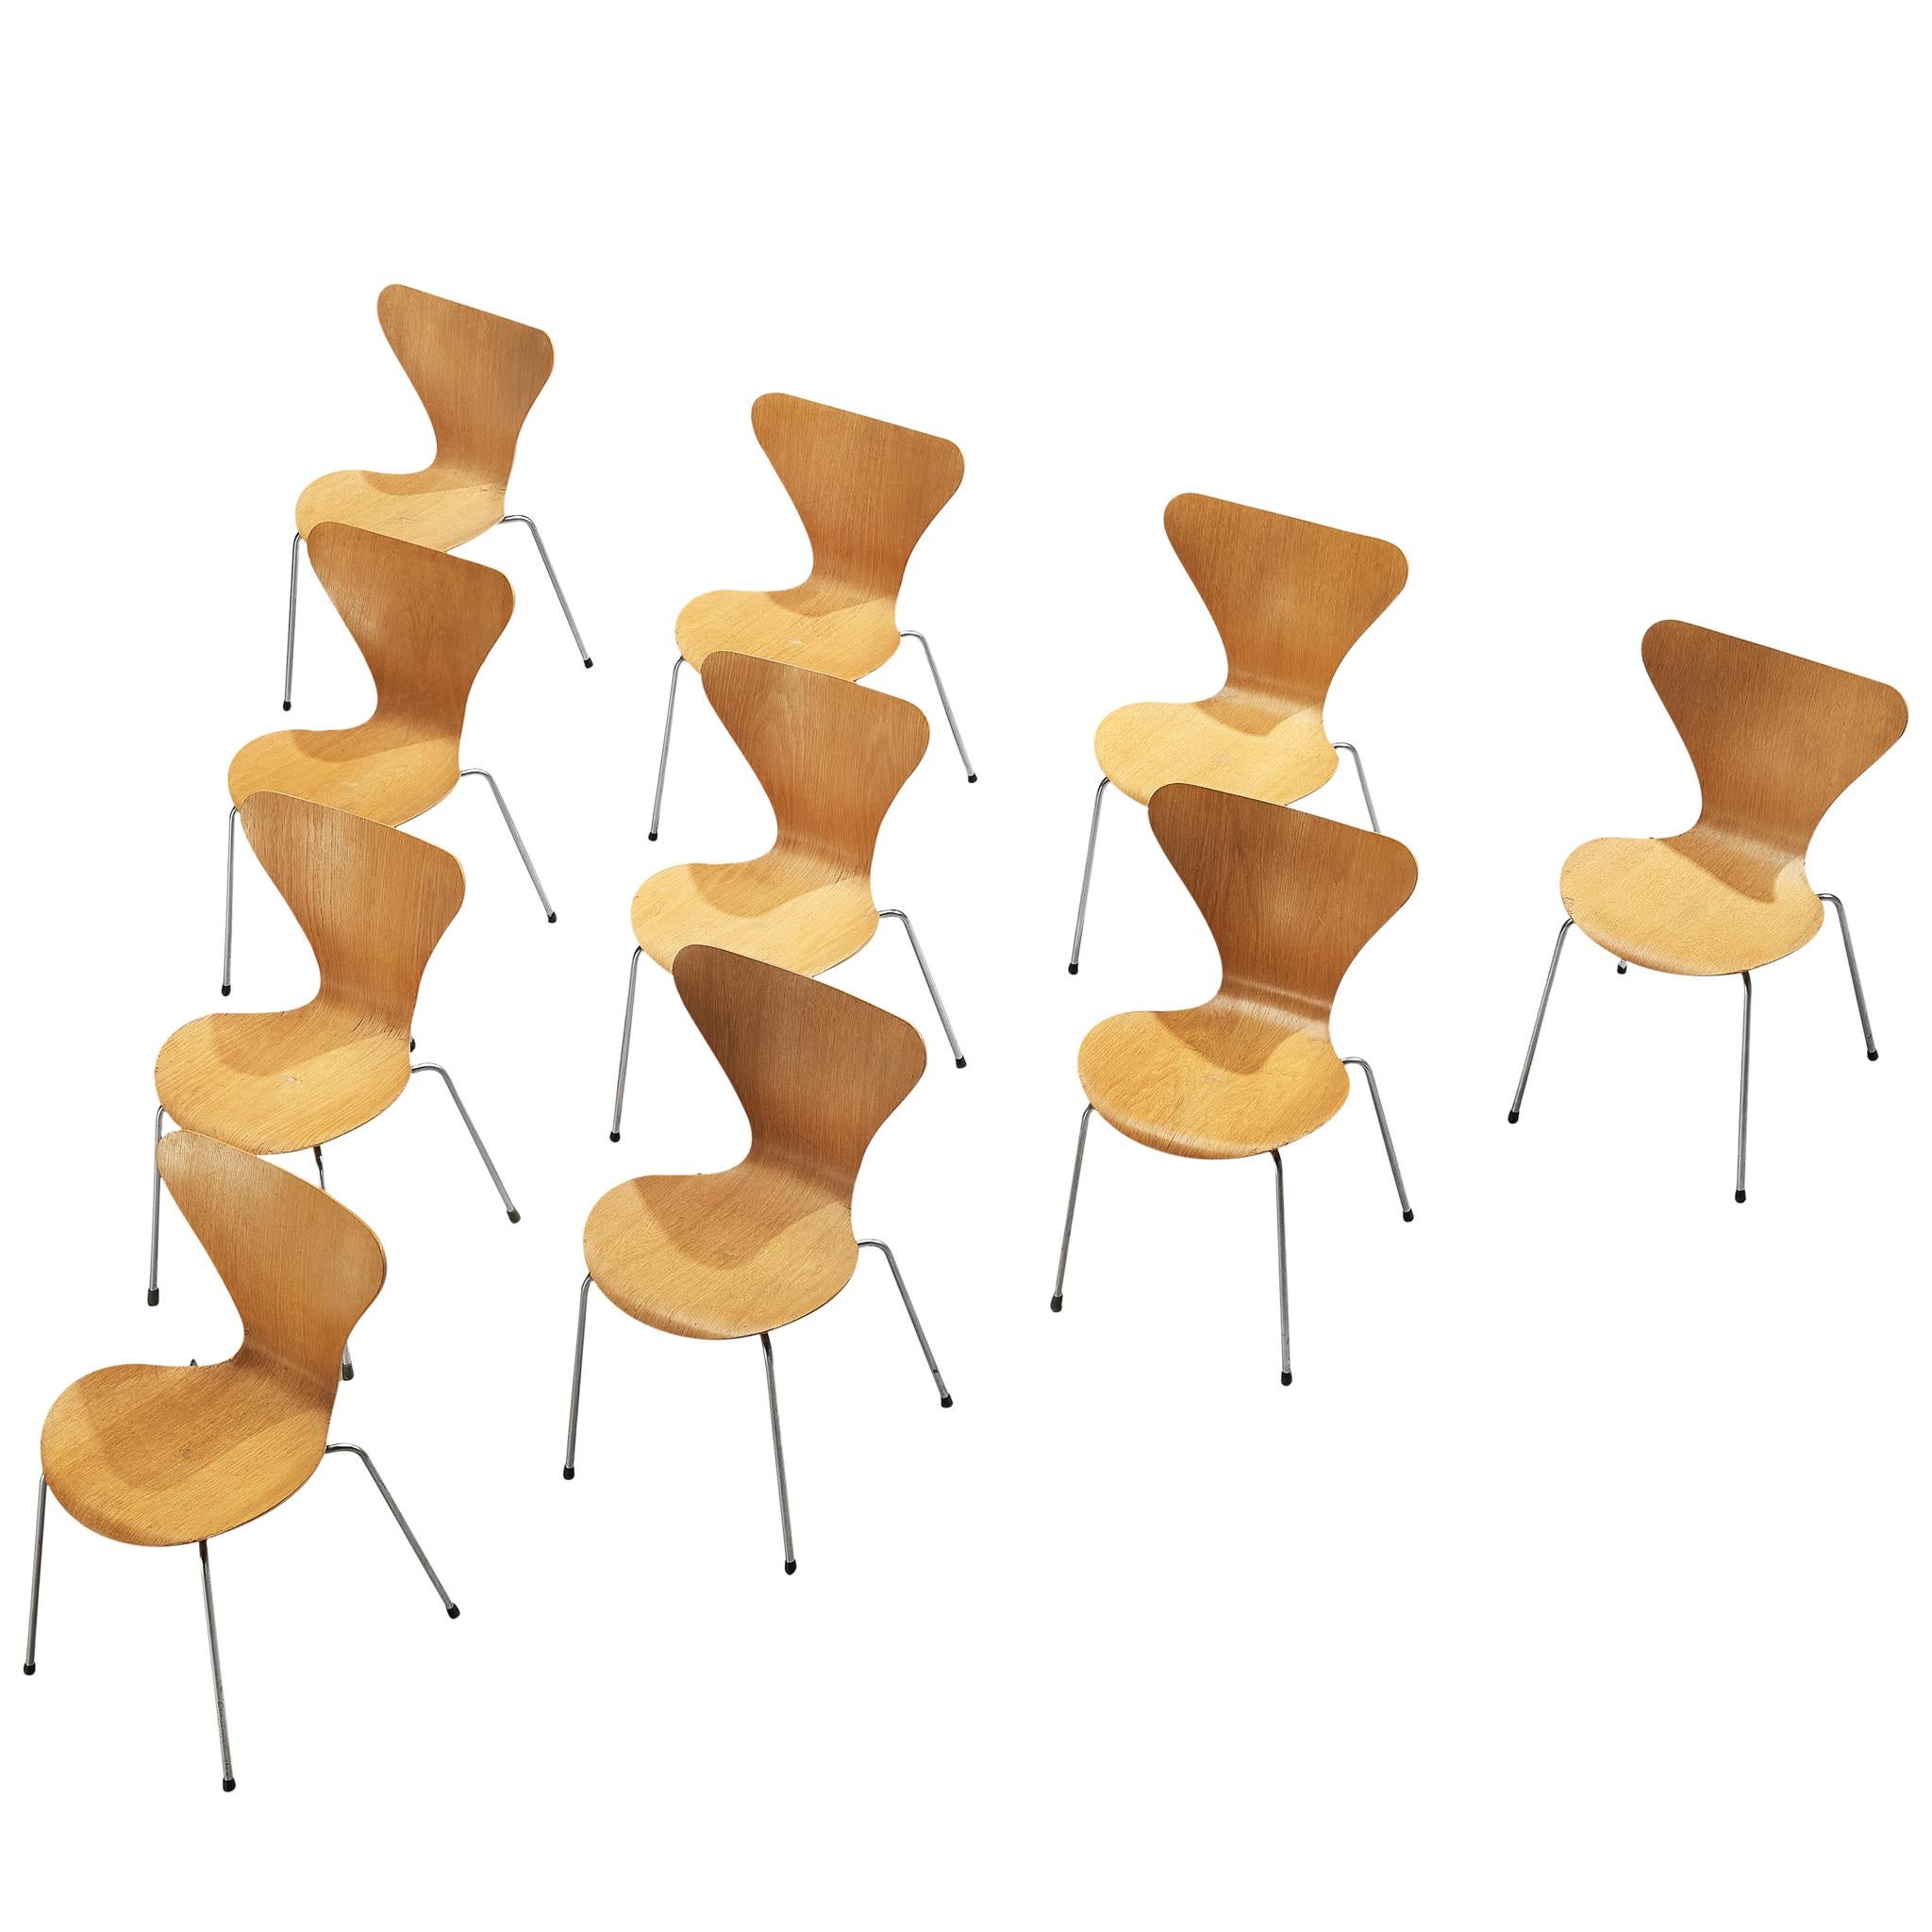 Arne Jacobsen for Fritz Hansen, 'Butterfly' or 3107 chairs, plywood, steel, Denmark, design 1955

Set of iconic multifunctional chairs by master designer Arne Jacobsen. These chairs were designed in 1955 and found their way into countless